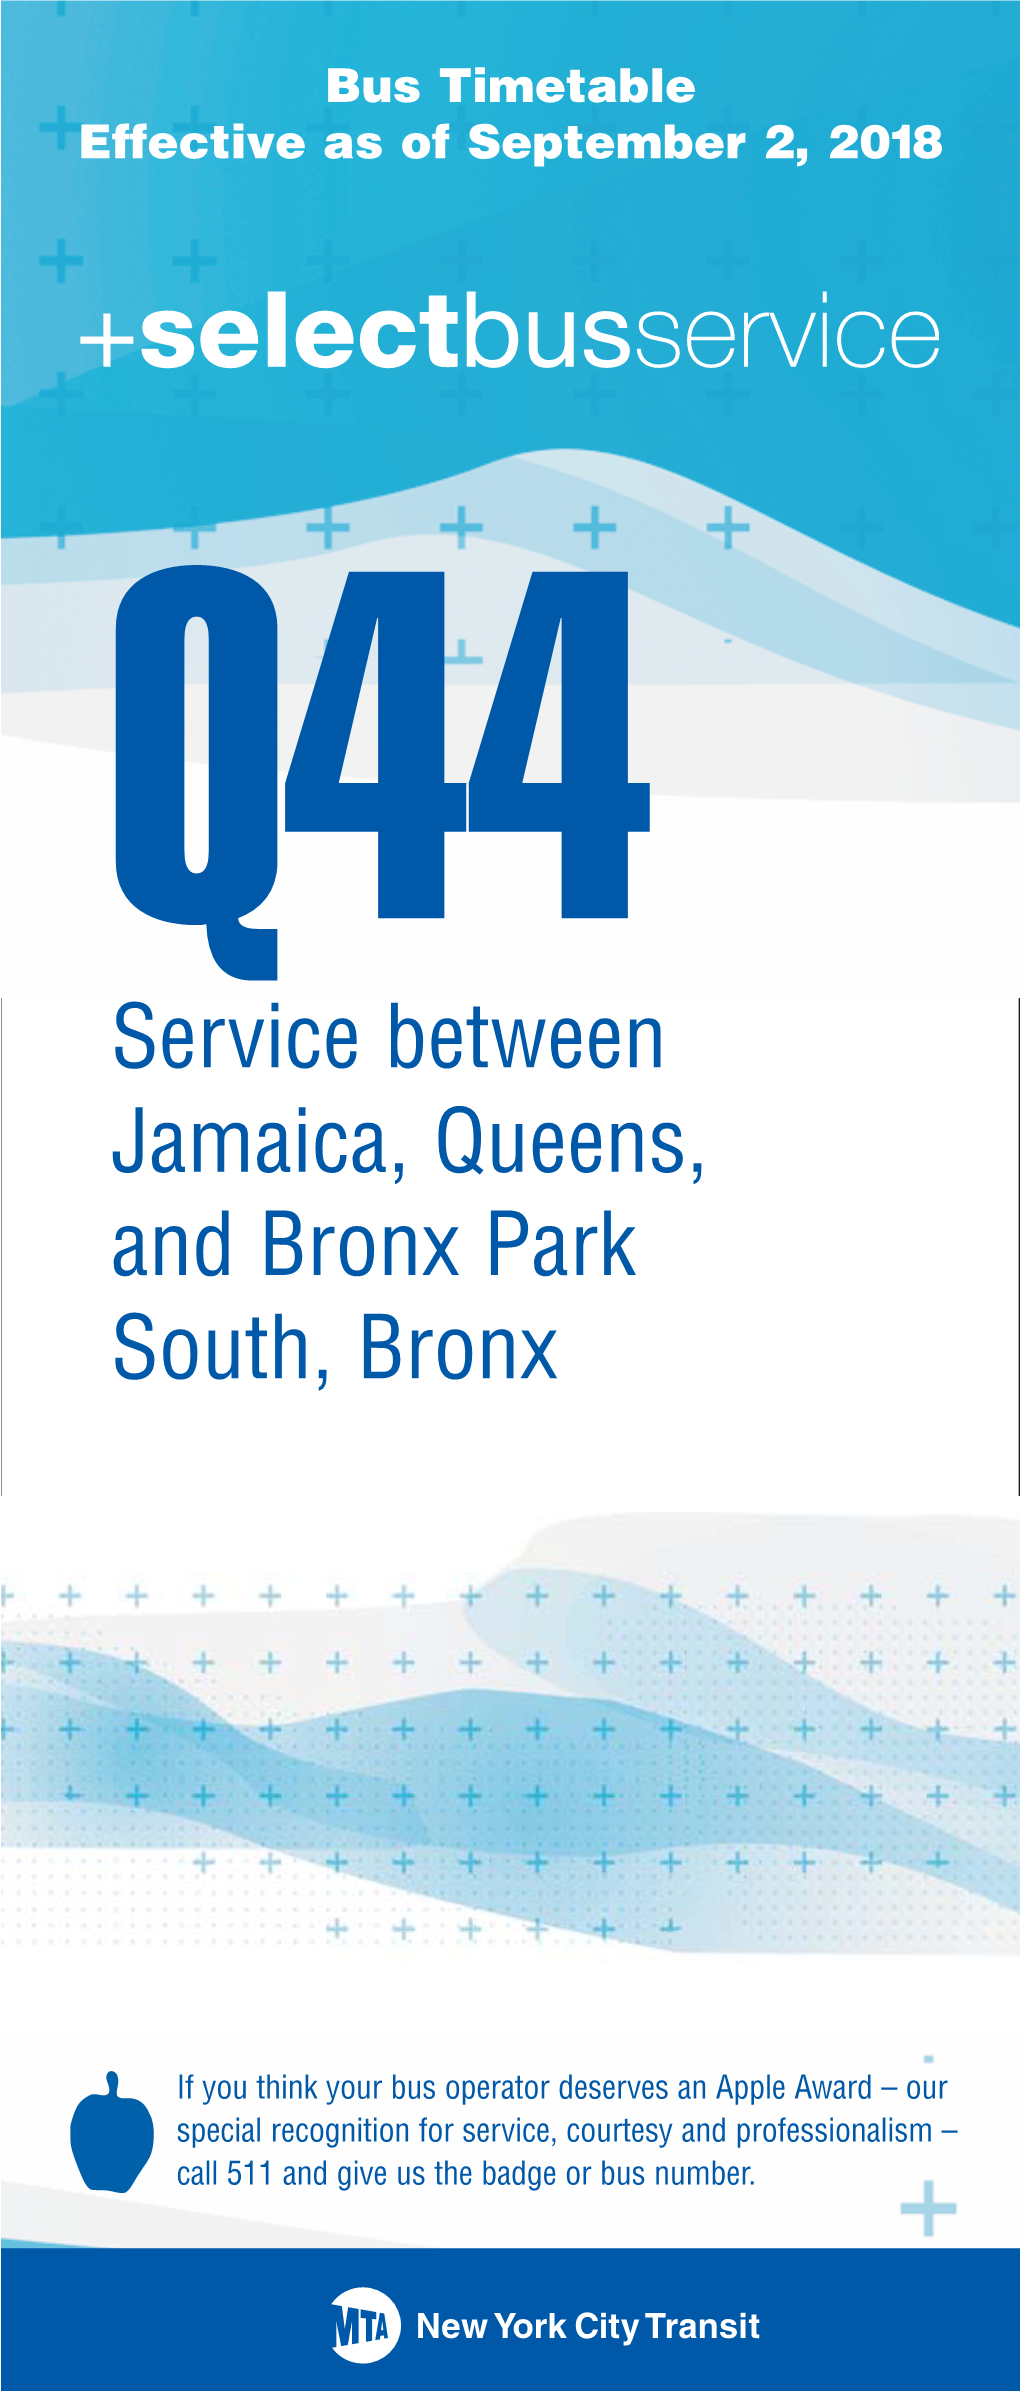 Service Between Jamaica, Queens, and Bronx Park South, Bronx